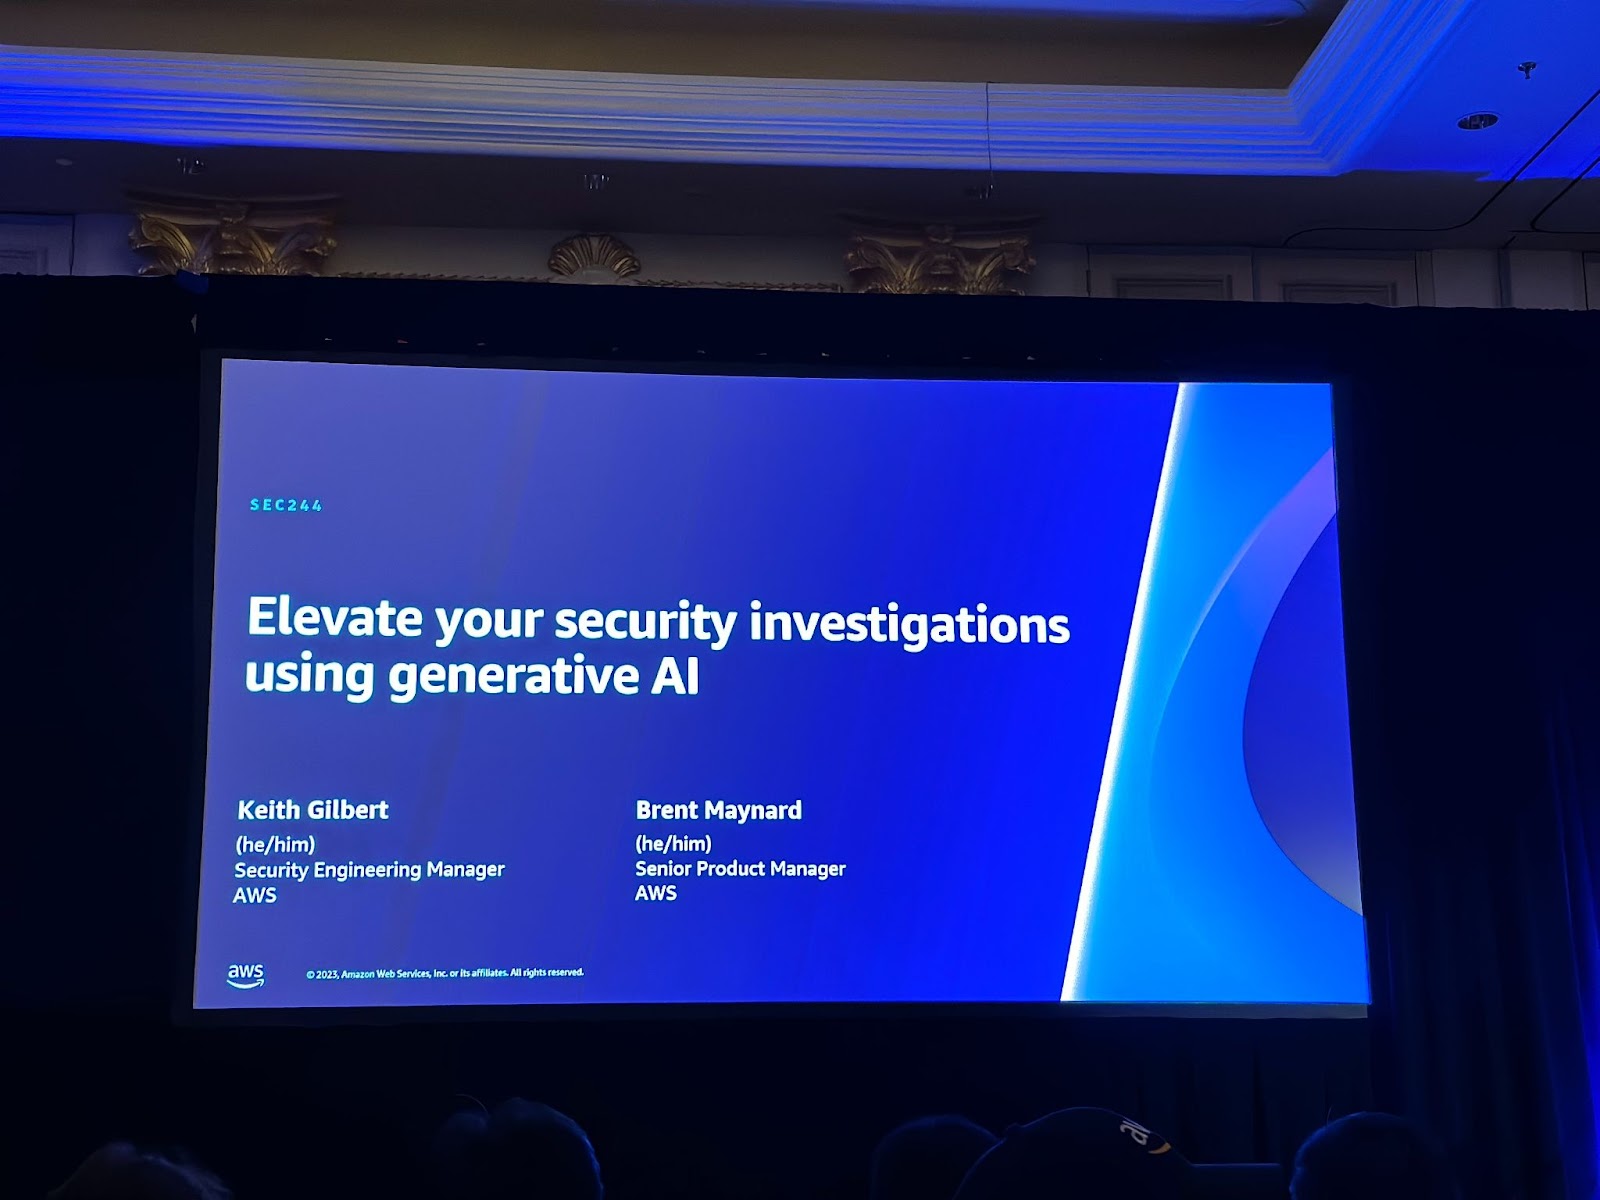 Elevate your security investigations using generative AI